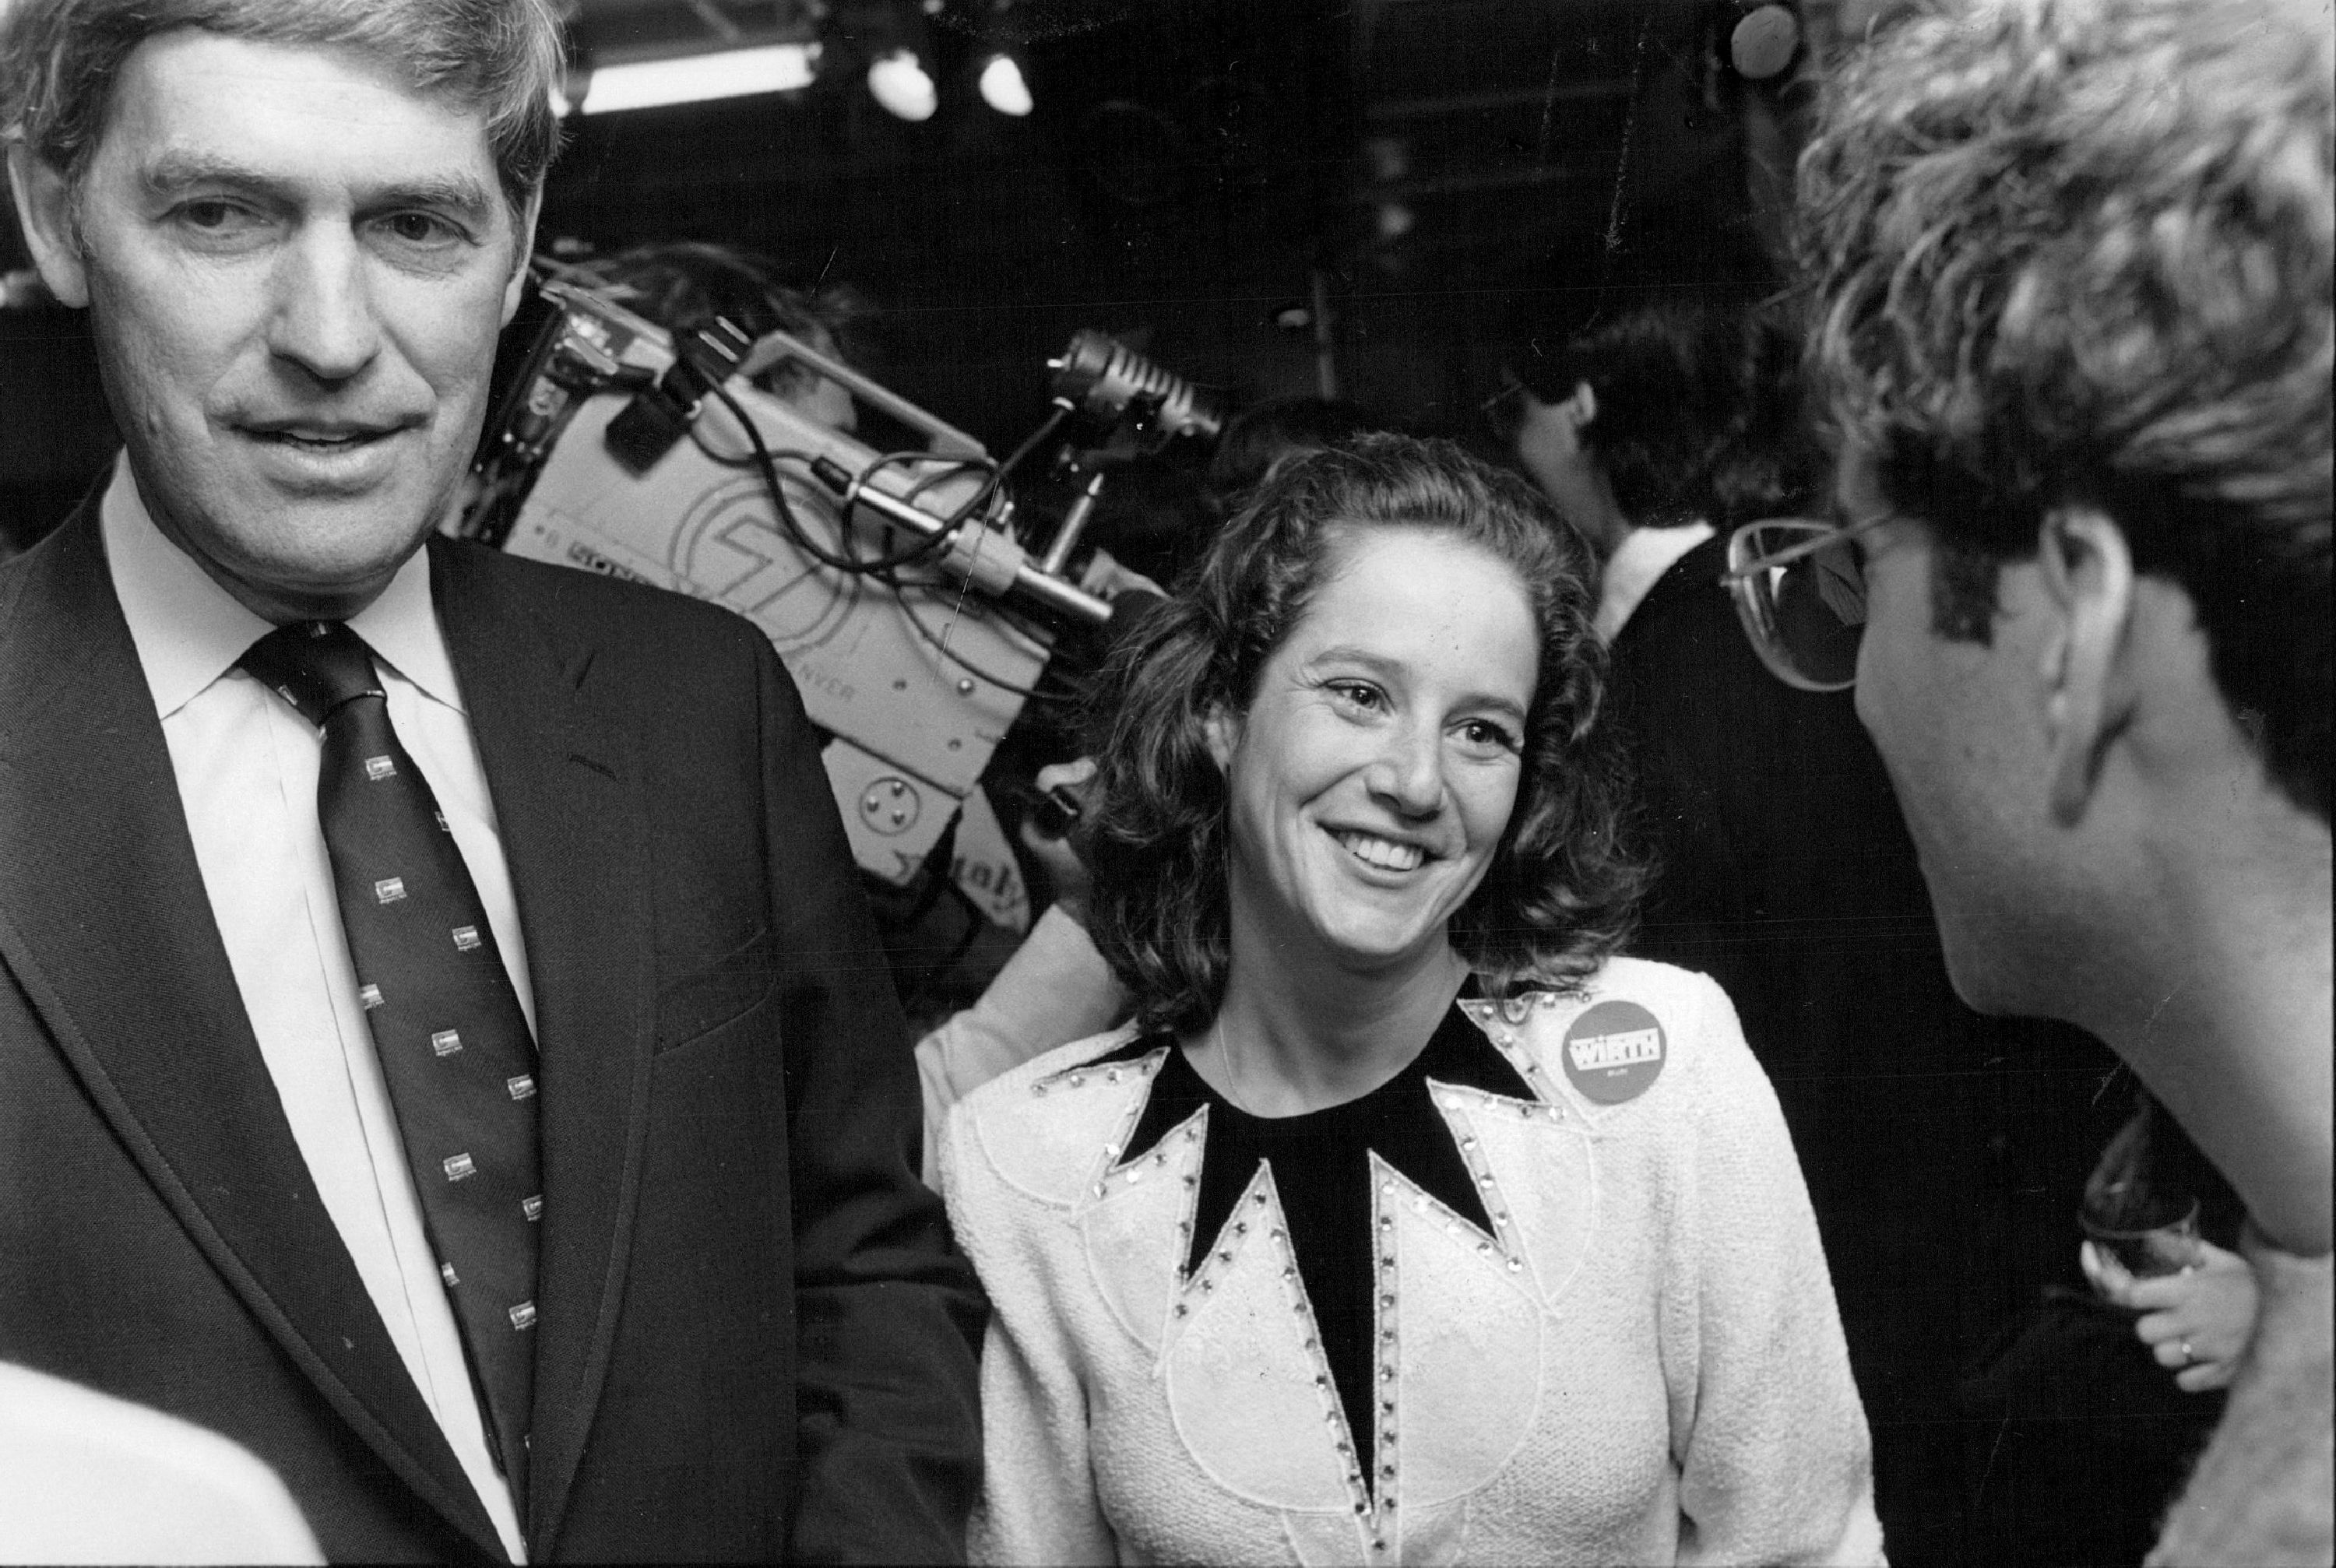 Debra Winger during an appearance at a Tim Wirth fund raiser at the Piranha Room on September 27, 1986 | Source: Getty Images